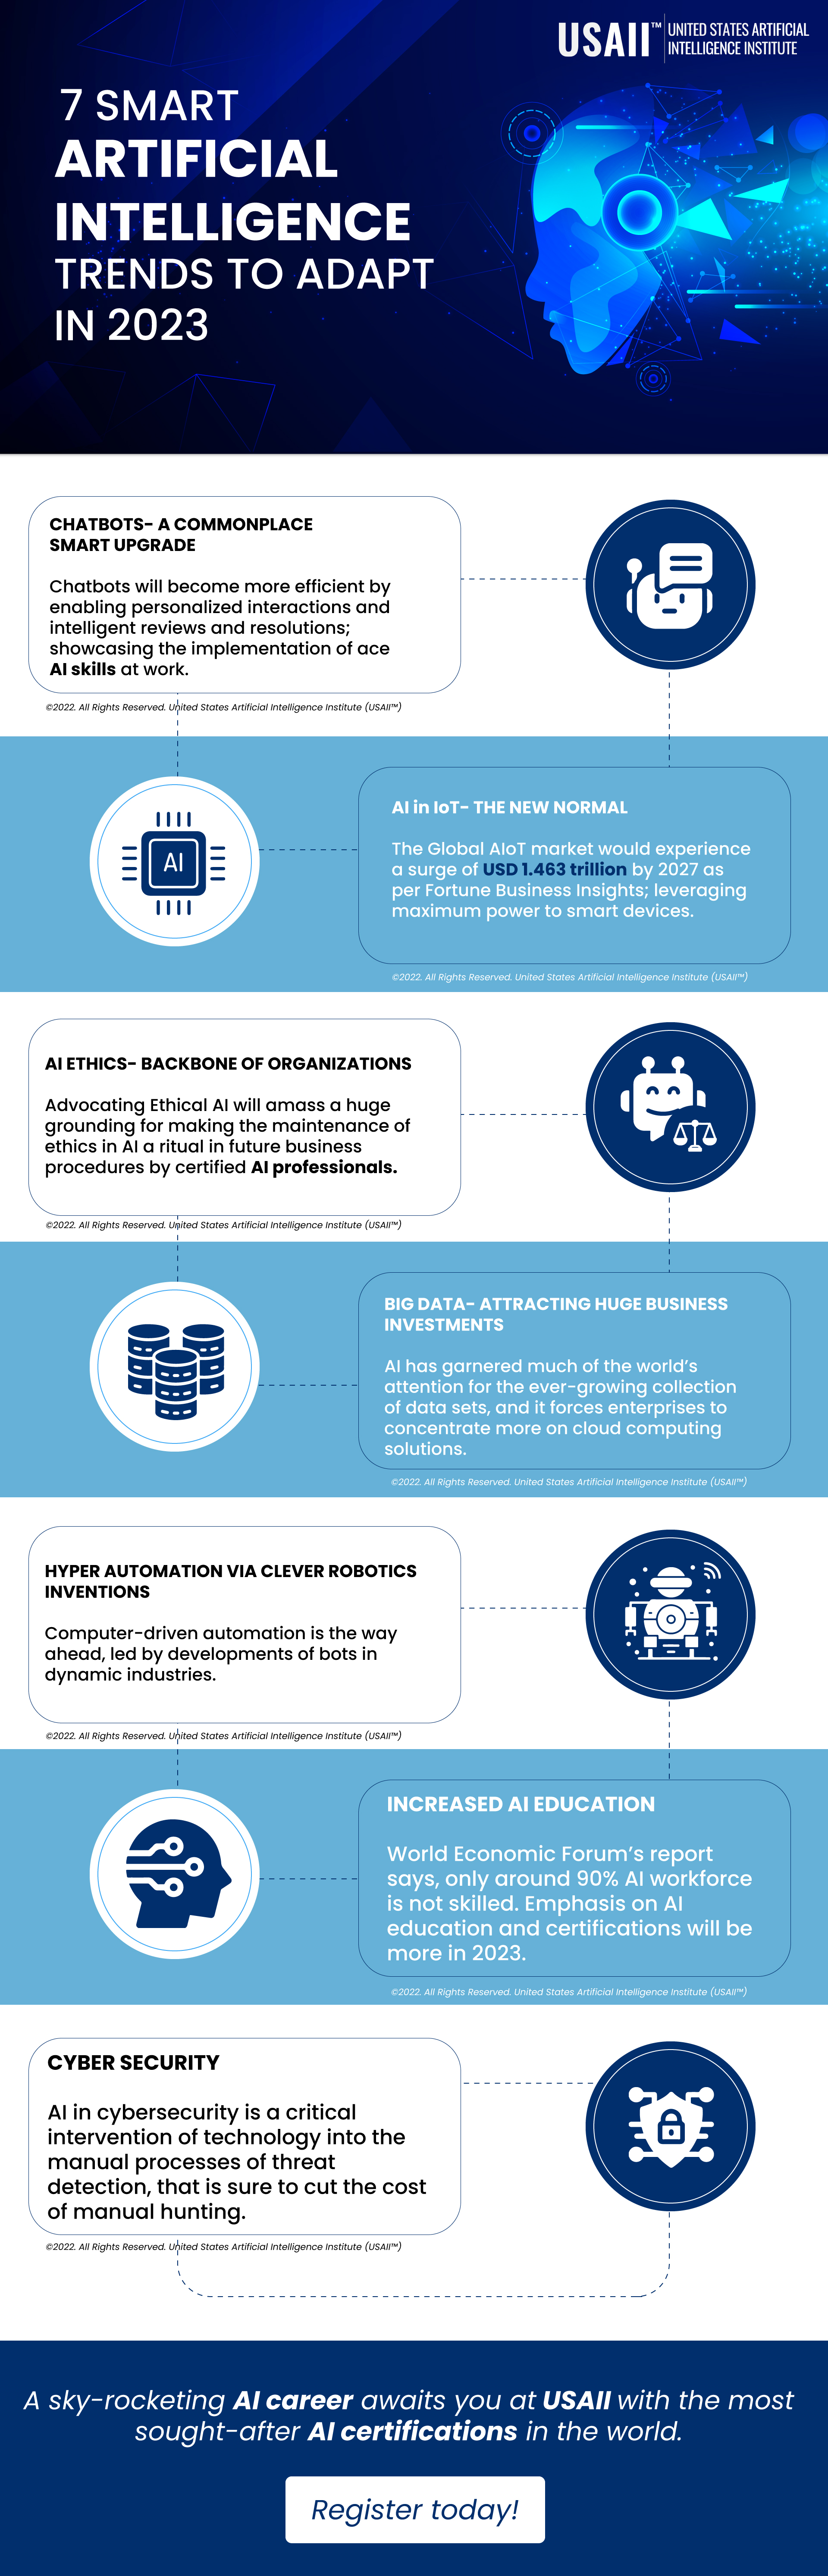 7 smart artificial intelligence trends to adapt in 2023 Infographic